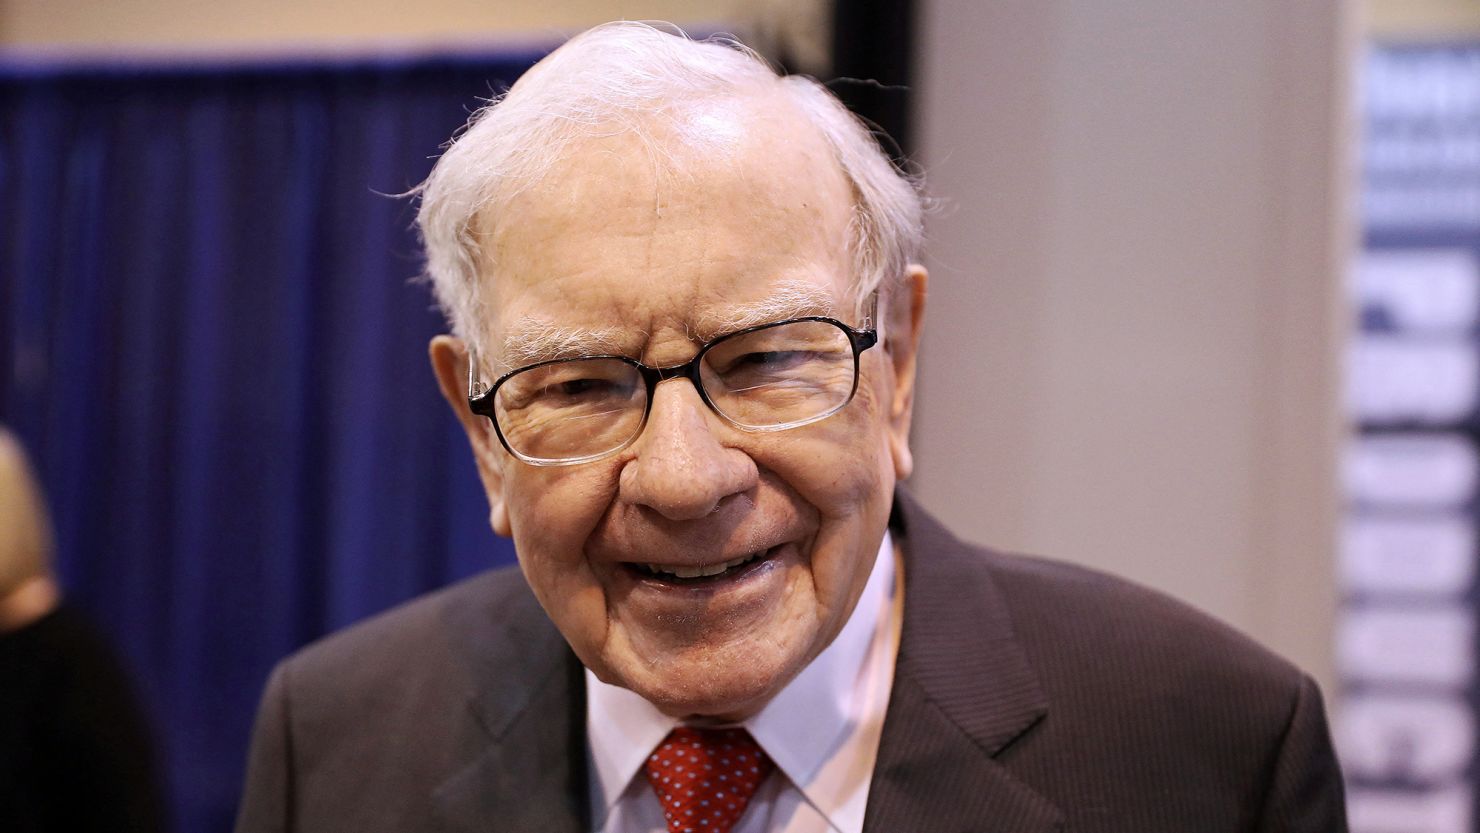 “We let a genie out of the bottle when we developed nuclear weapons,” Buffett said Saturday. “AI is somewhat similar — it’s part way out of the bottle.”